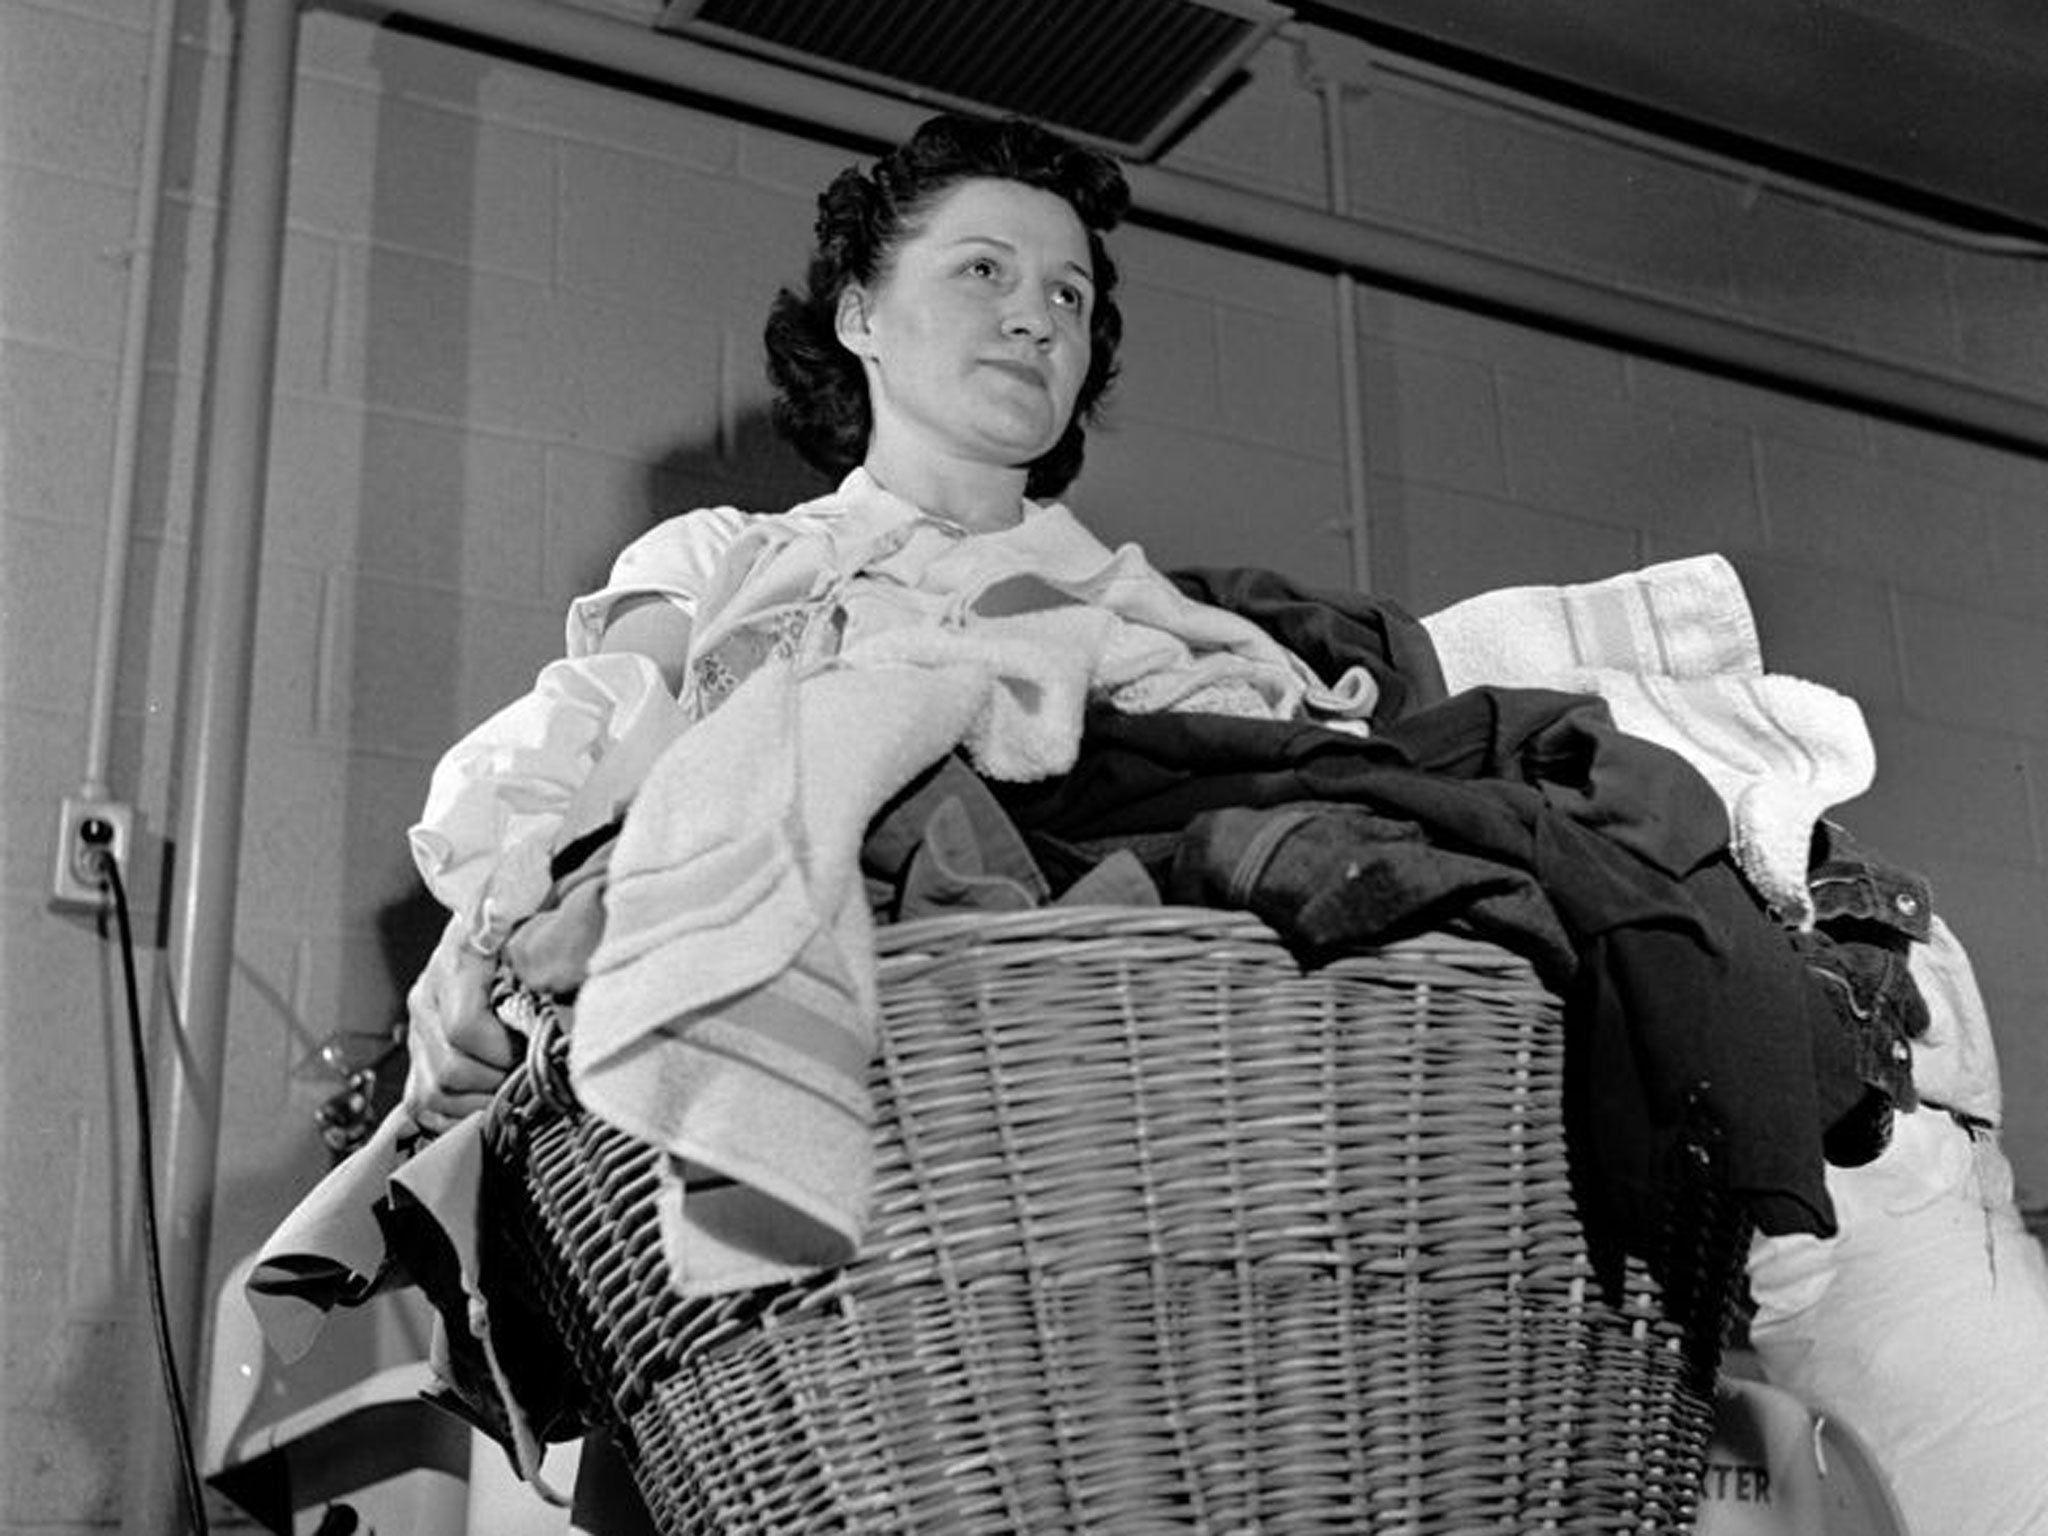 A reader's washing machine was a basket case but a care plan did not resolve the issue